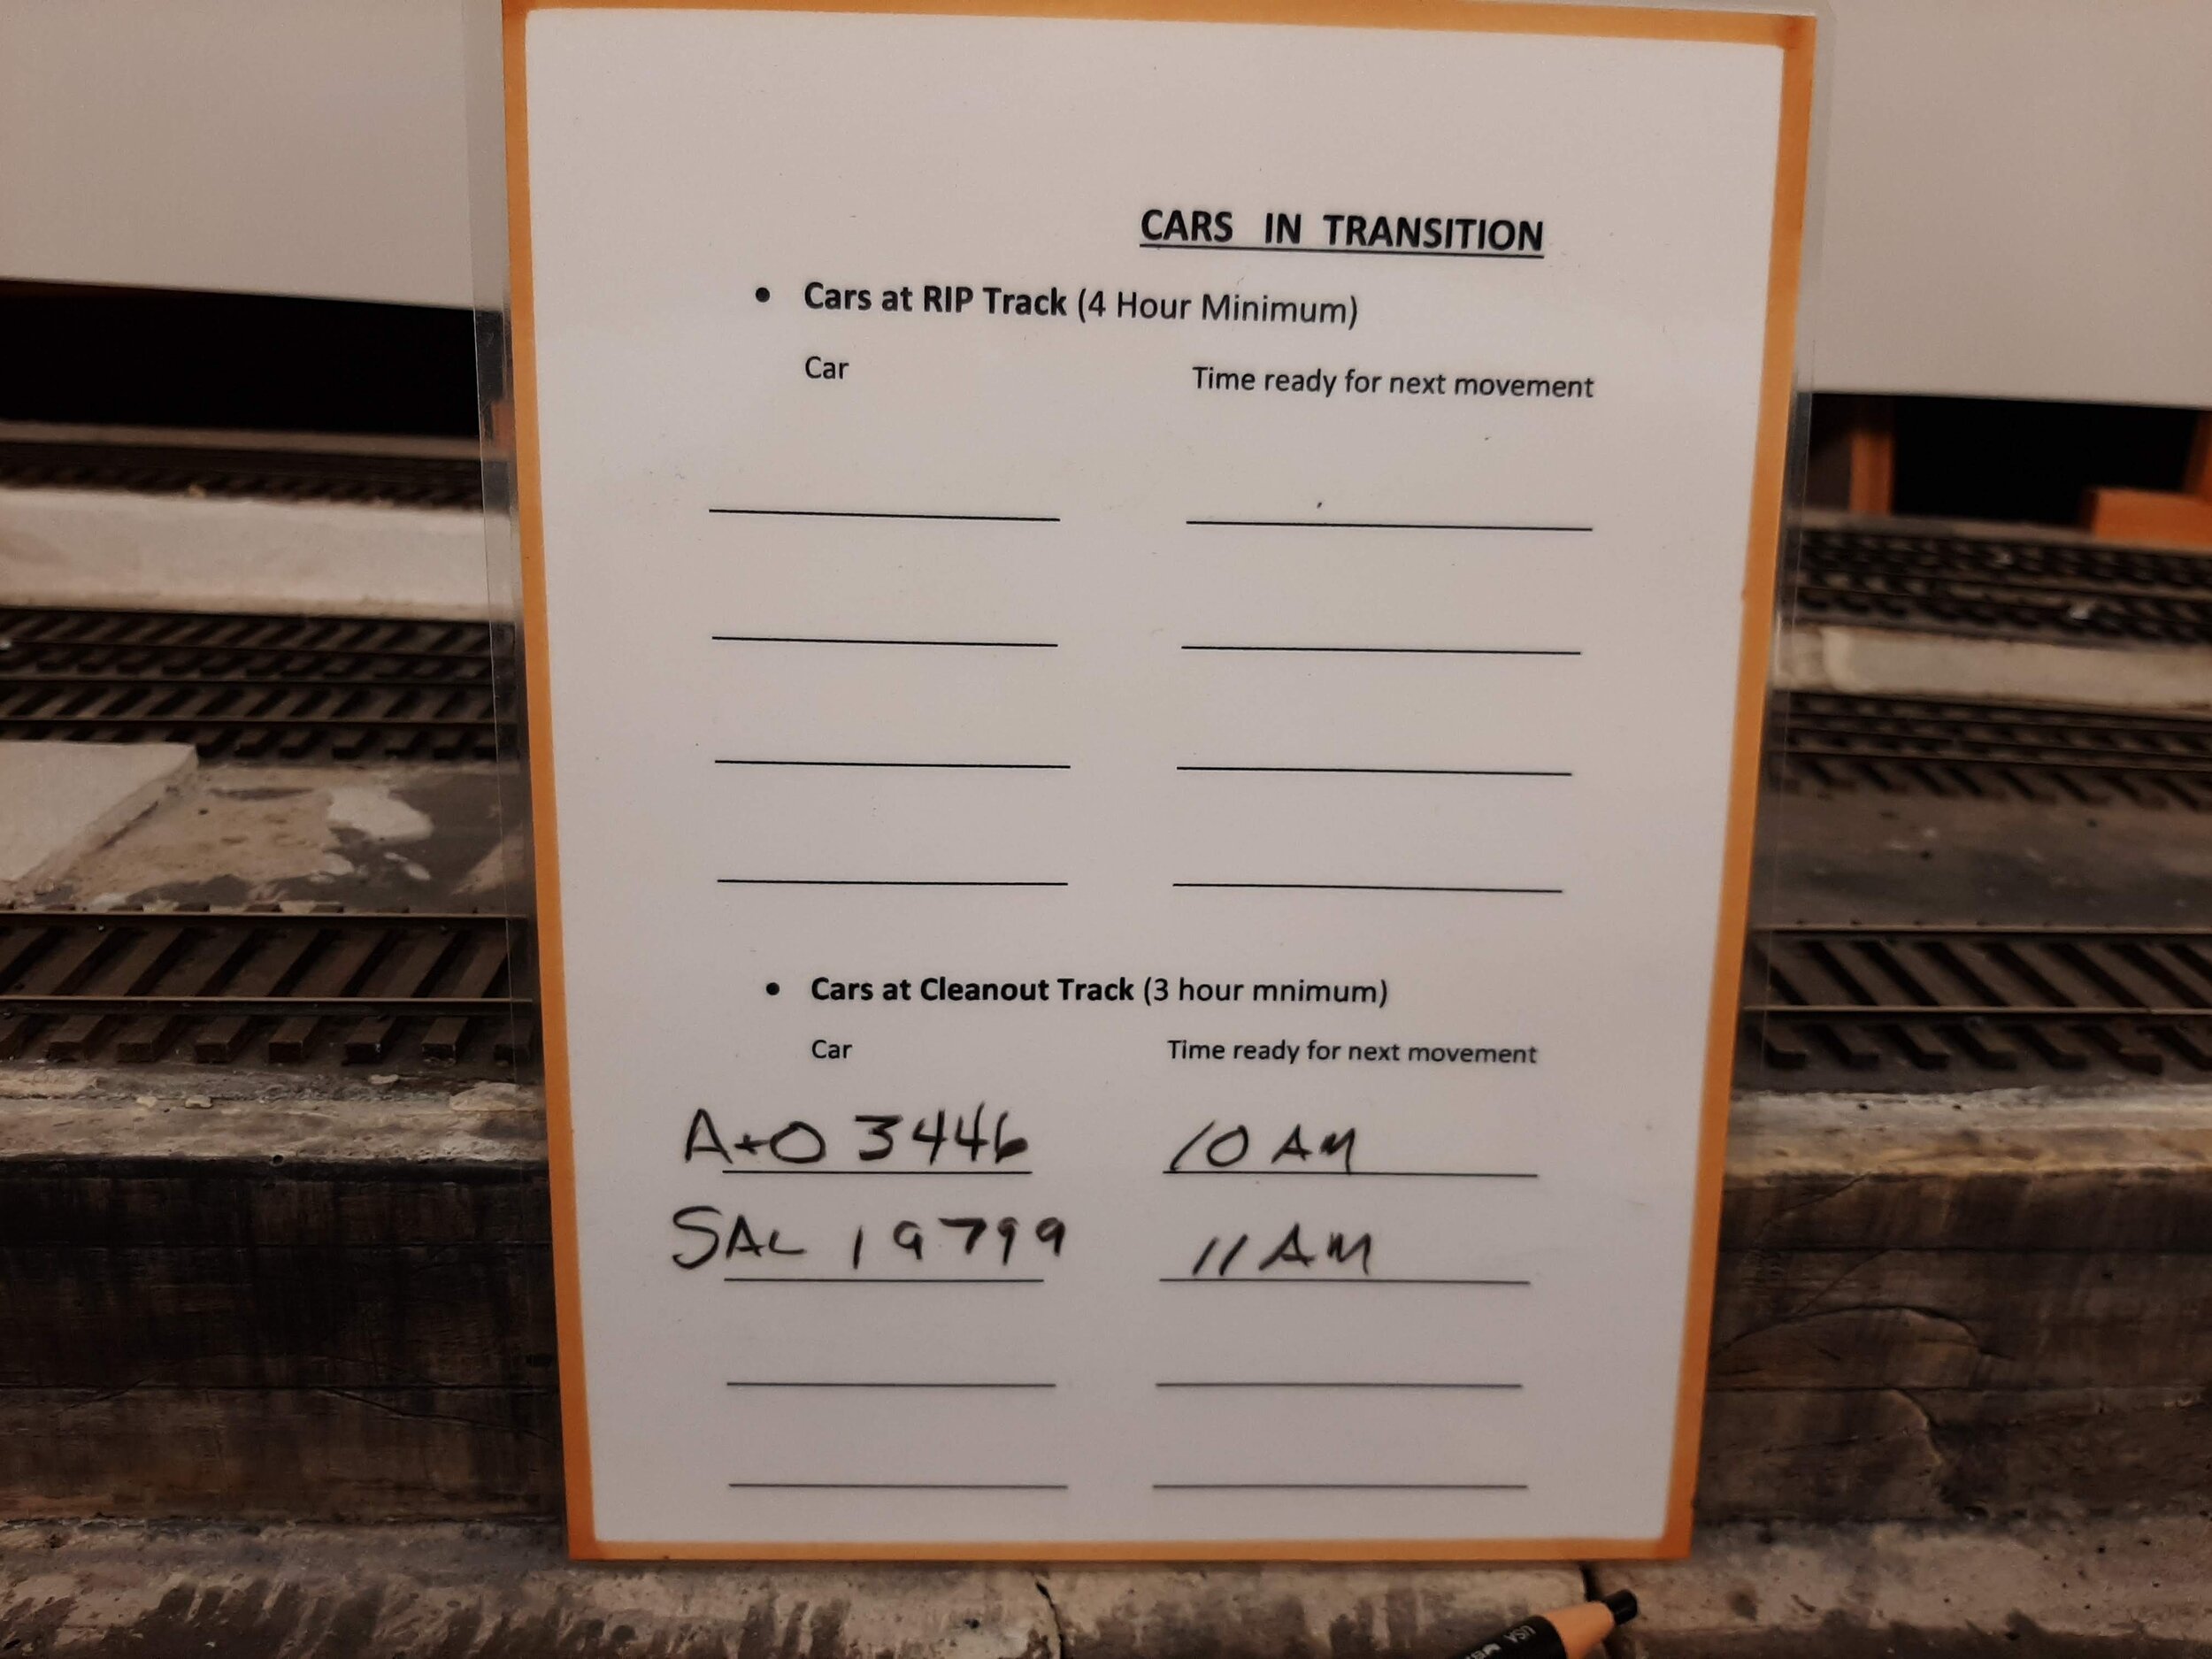  A similar sheet at the YM “desk” keeps track of this. YM will alert crews when it’s time to pull the card and put the car back into it’s routing. 